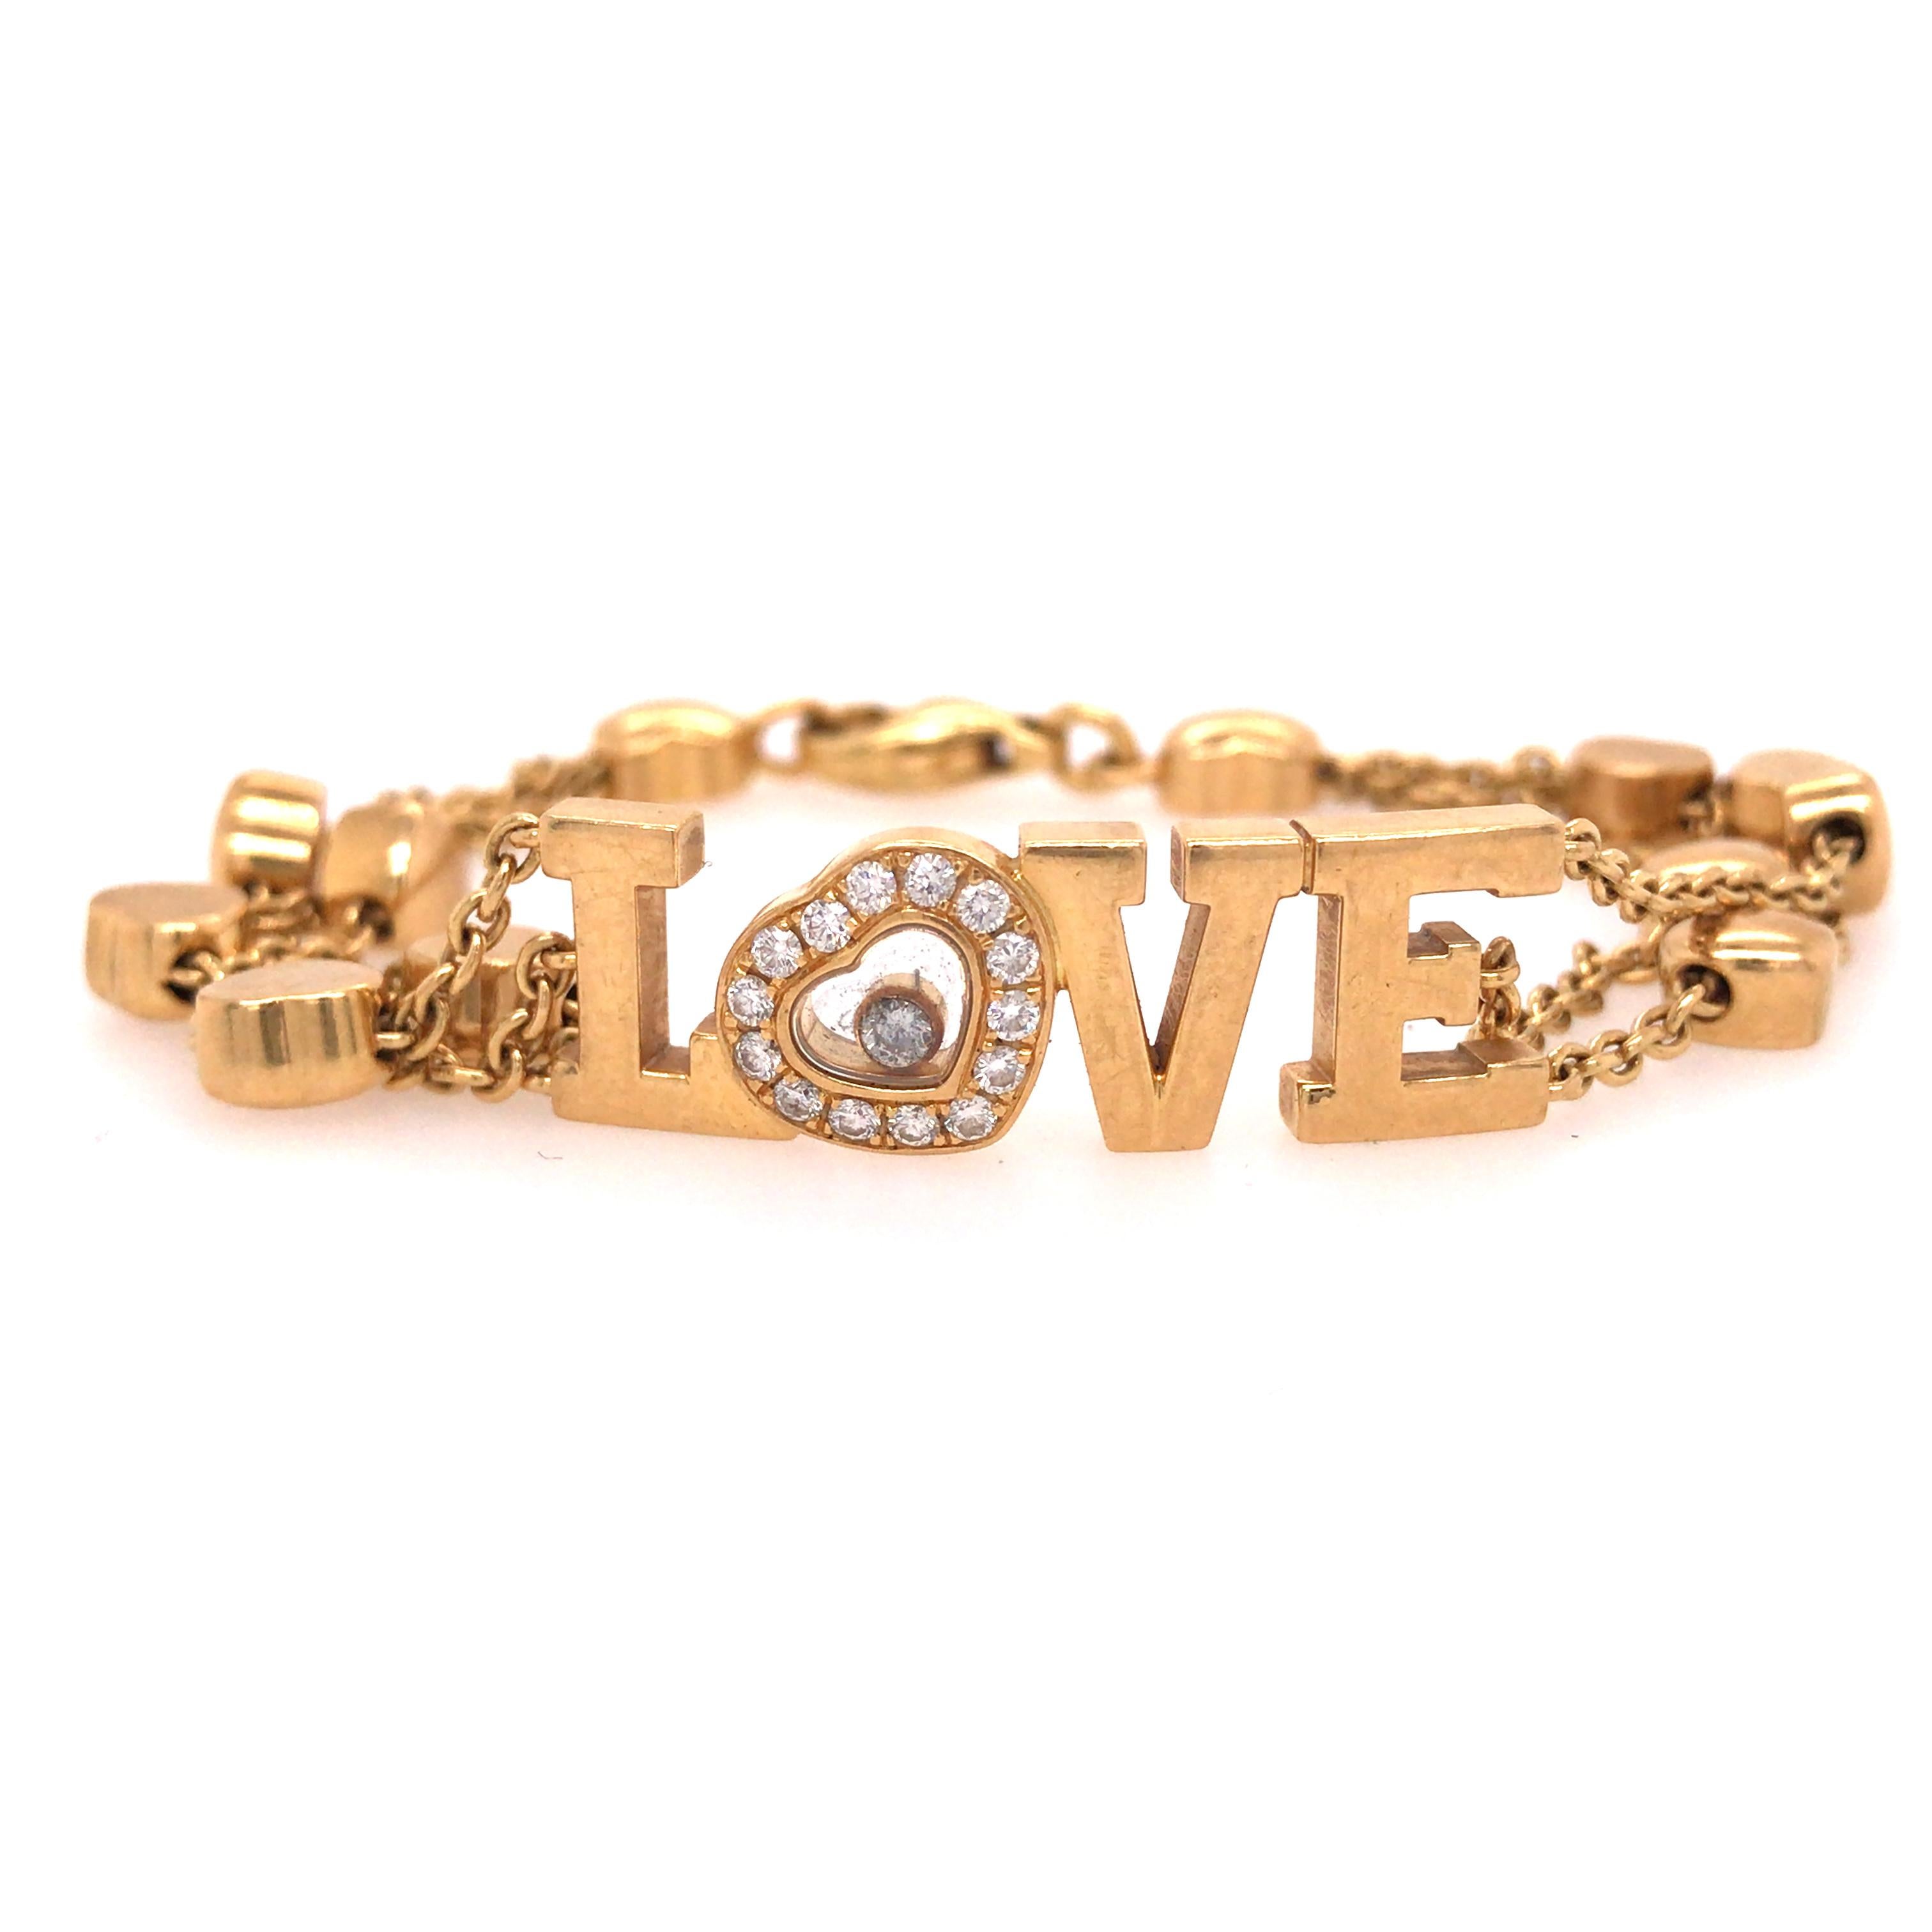 Chopard Happy Diamond Love Bracelet in 18K Yellow Gold.  Round Brilliant Cut Diamonds weighing 0.33 carat total weight, E-F in color and VVS in clarity are expertly set.  The Bracelet measures 6 1/2 inch in length and 3/8 inch in width. 25.97 grams.